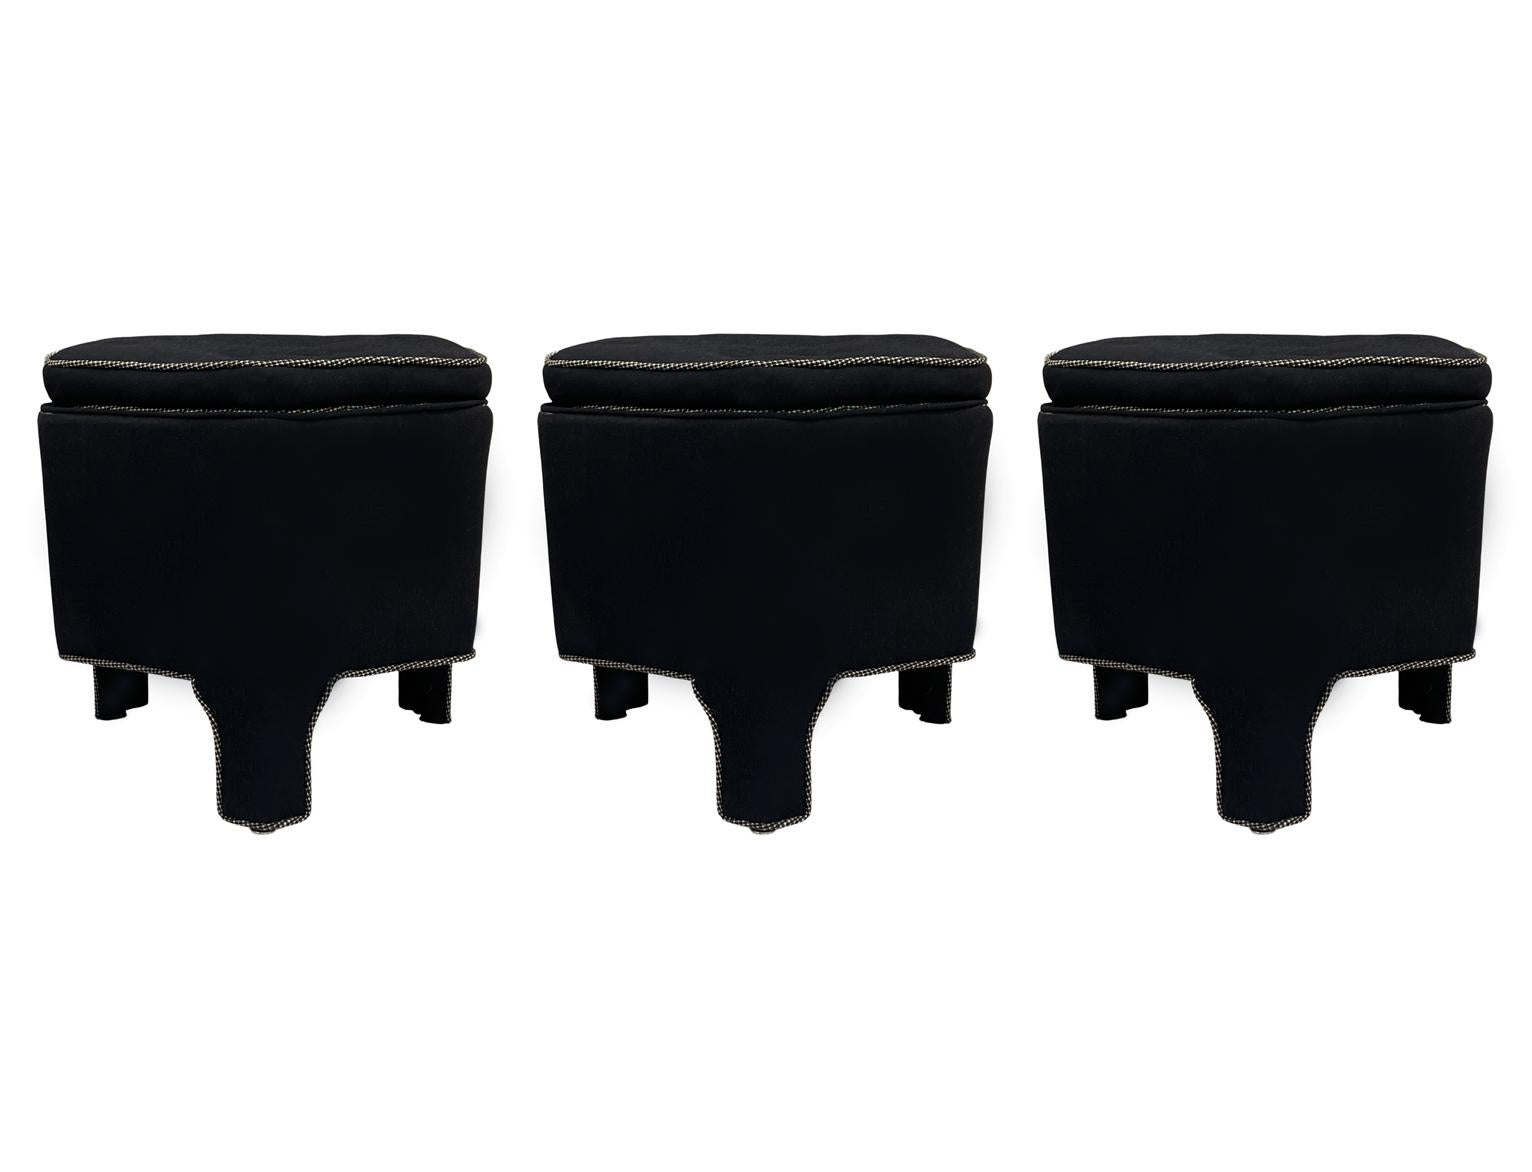 Hollywood Regency Trio of Mid-Century Modern Upholstered Stools or Benches in Hexagonal Form For Sale